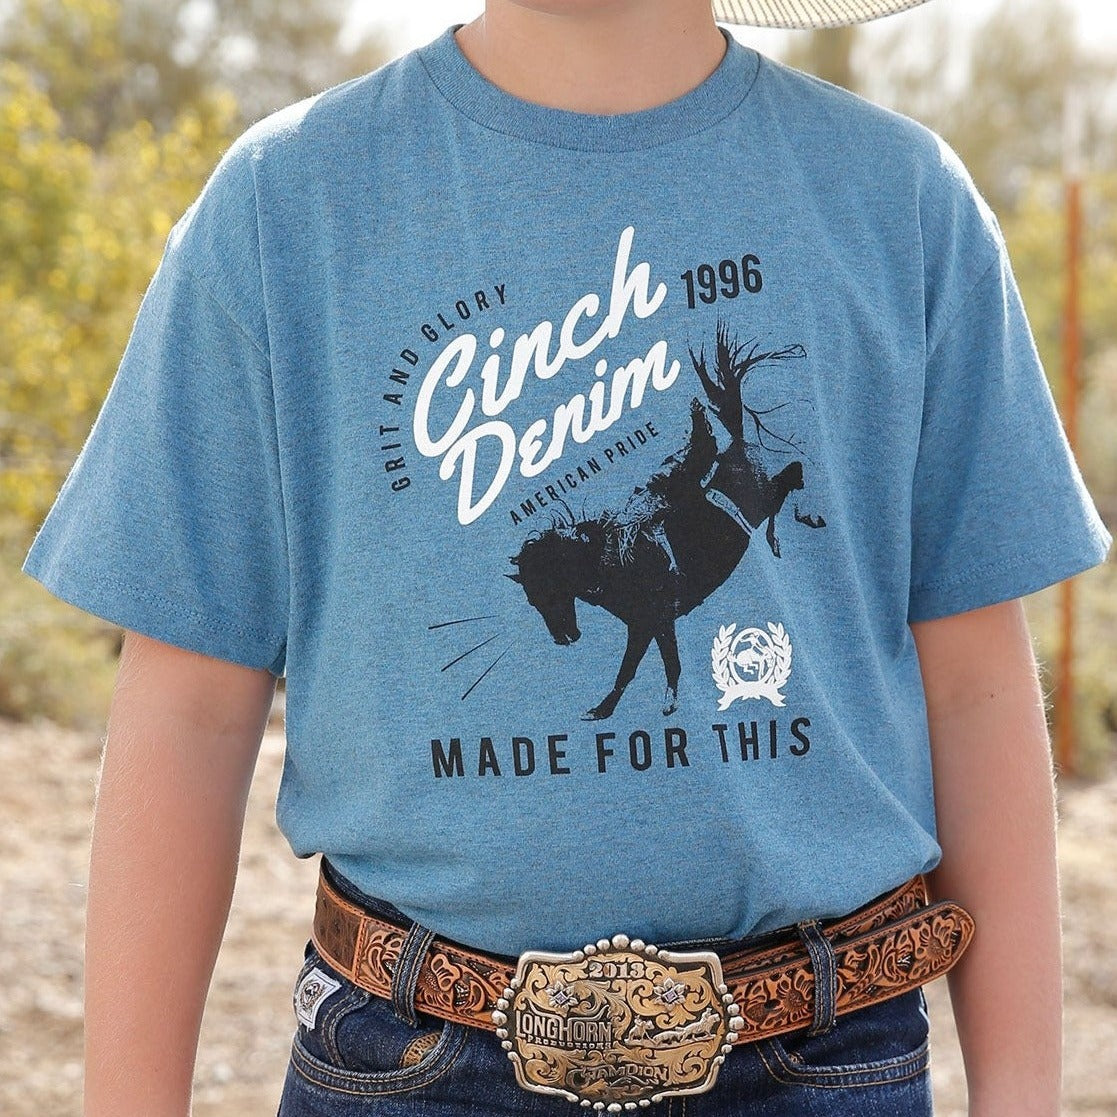 "Made For This" Tee | Cinch Boys